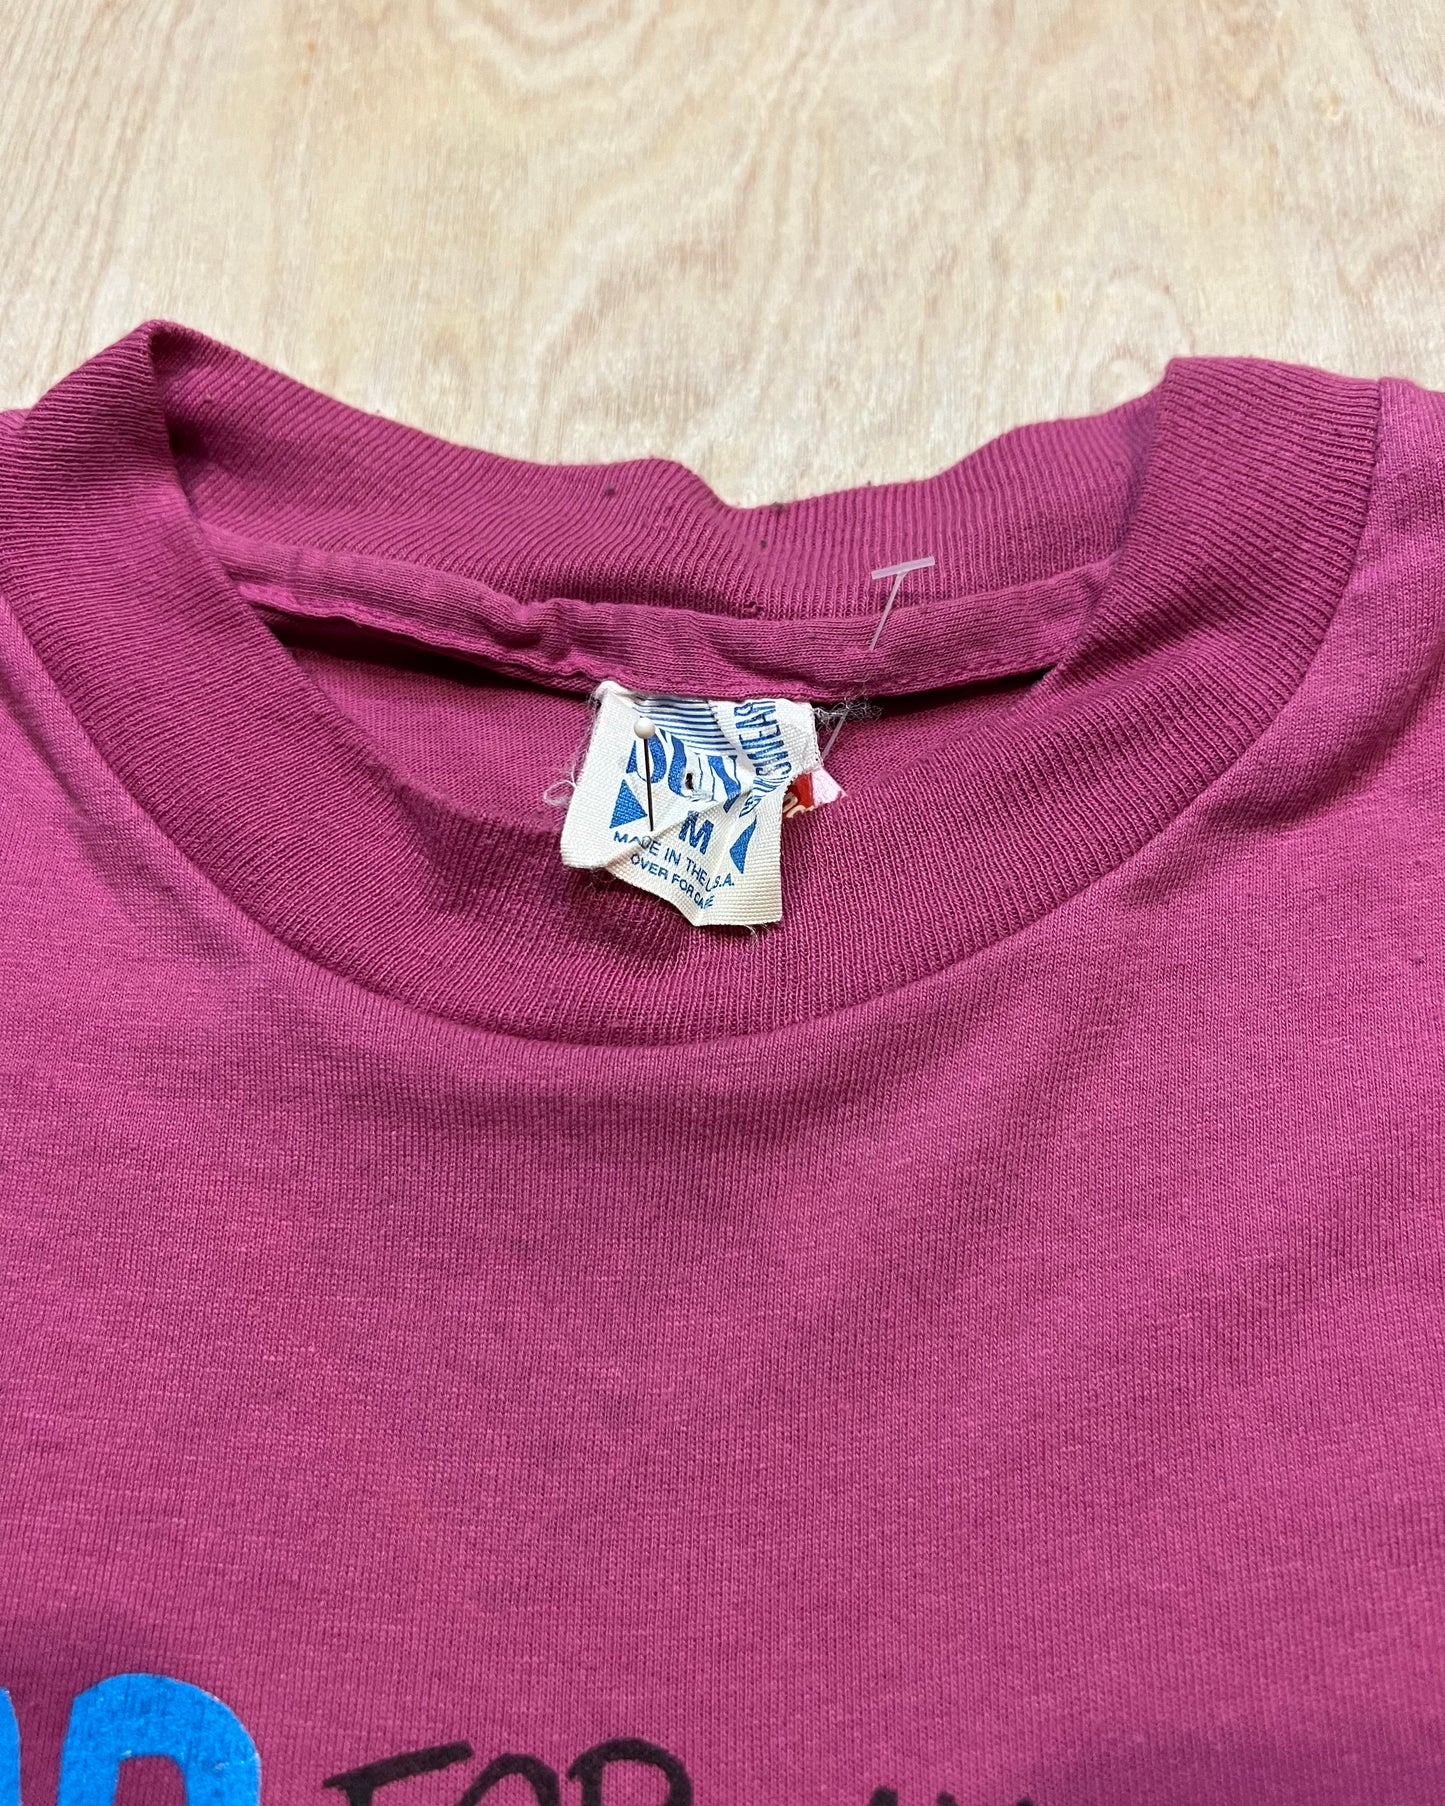 Vintage "A Dad for all Seasons" Single Stitch T-Shirt